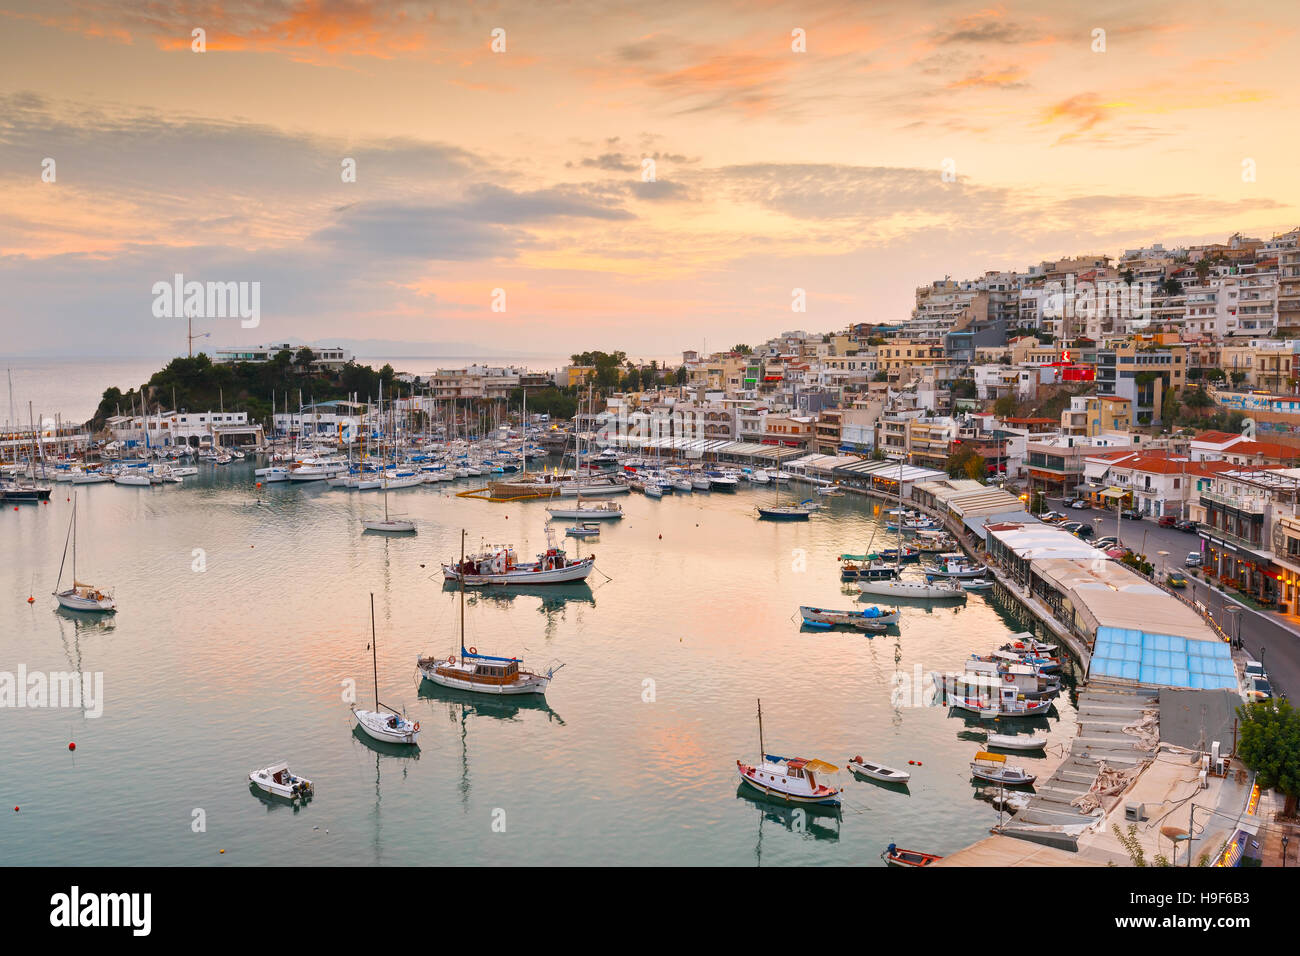 Evening view of Mikrolimano marina in Athens, Greece. Stock Photo